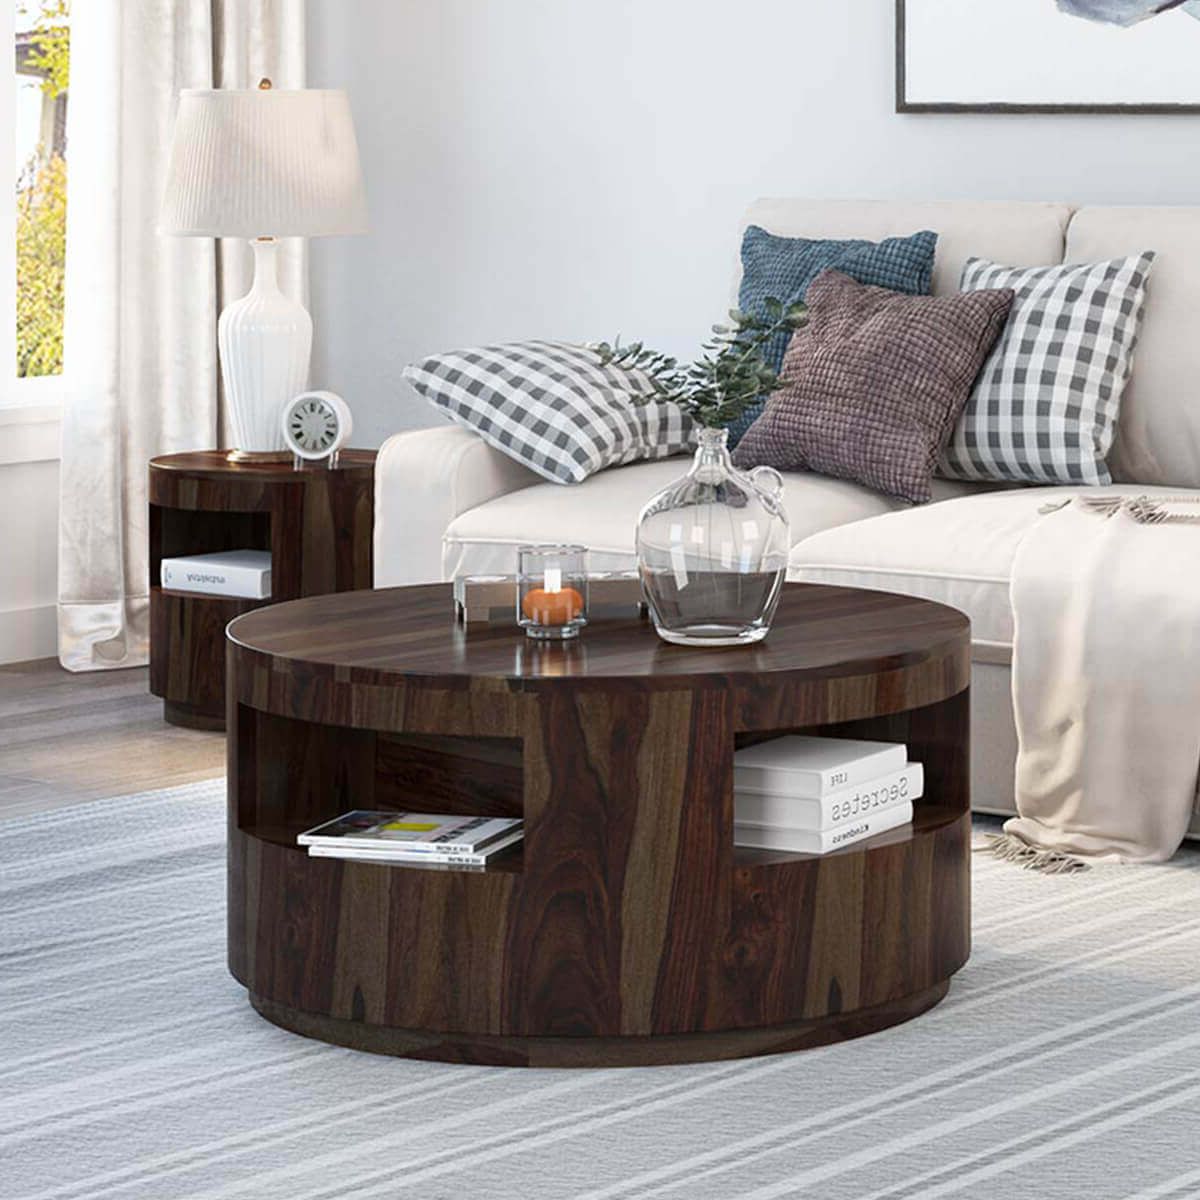 Ladonia Rustic Solid Wood Round Coffee Table With Shelves Intended For Current Wood Coffee Tables (View 10 of 20)